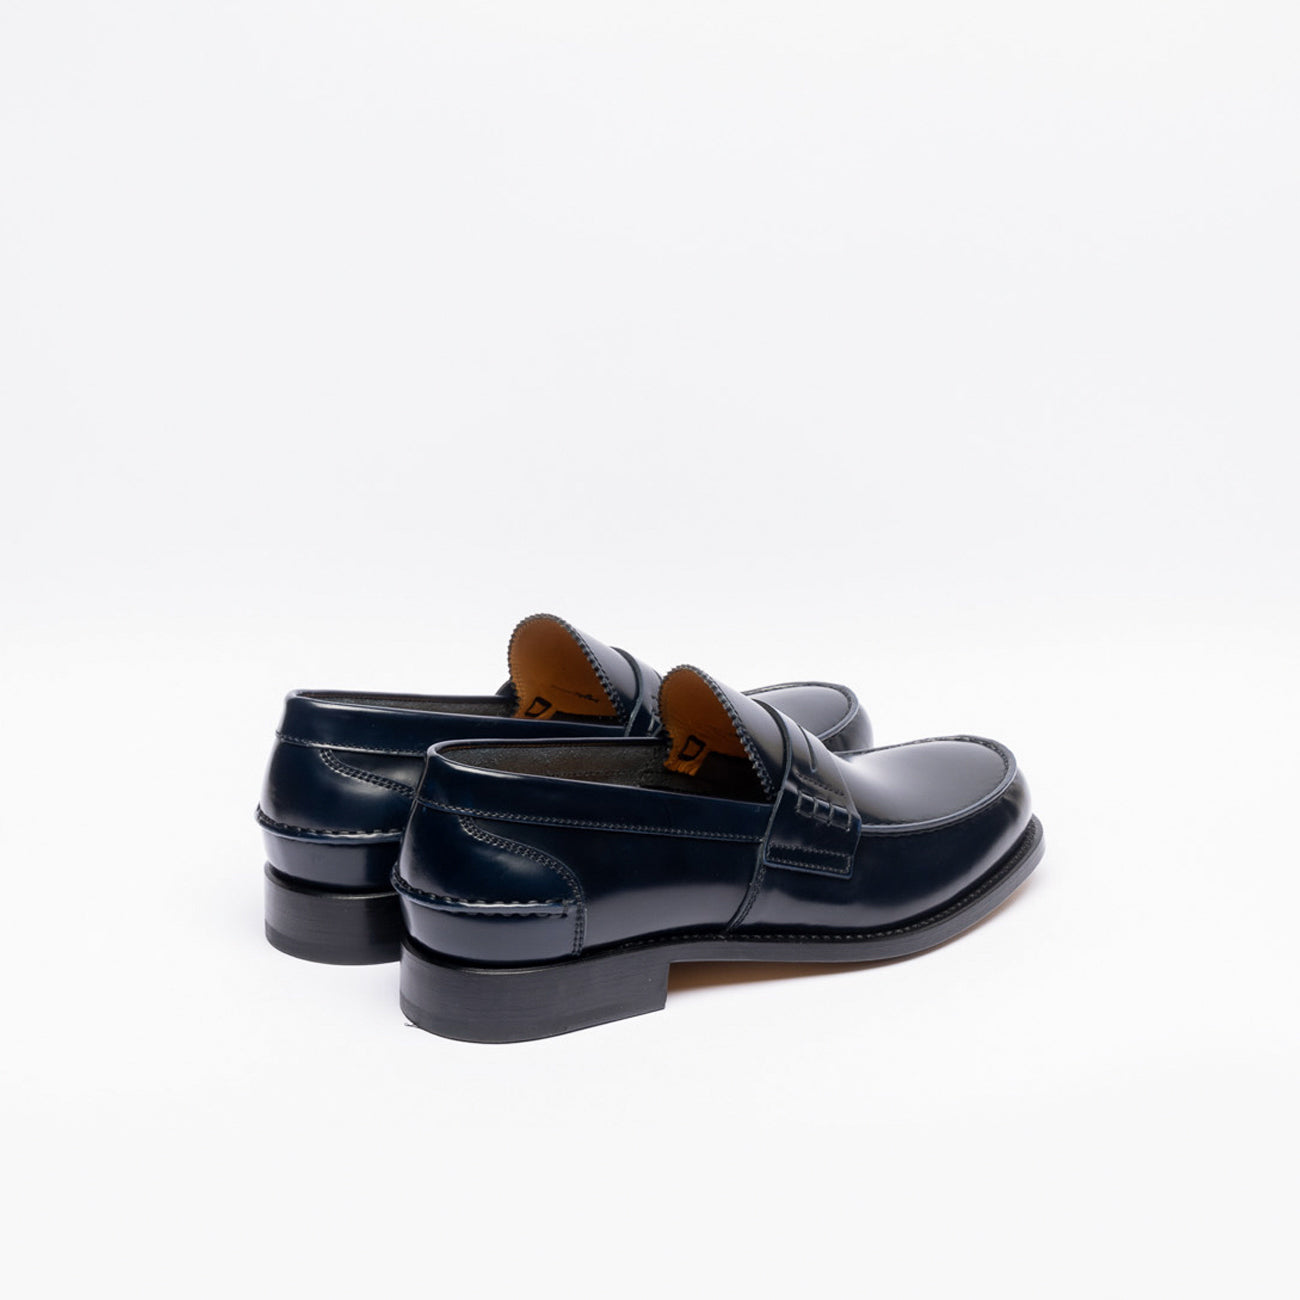  Penny loafer Borghini 750 loafer in blue brushed leather Penny loafer Borghini 750 loafer in blue brushed leather